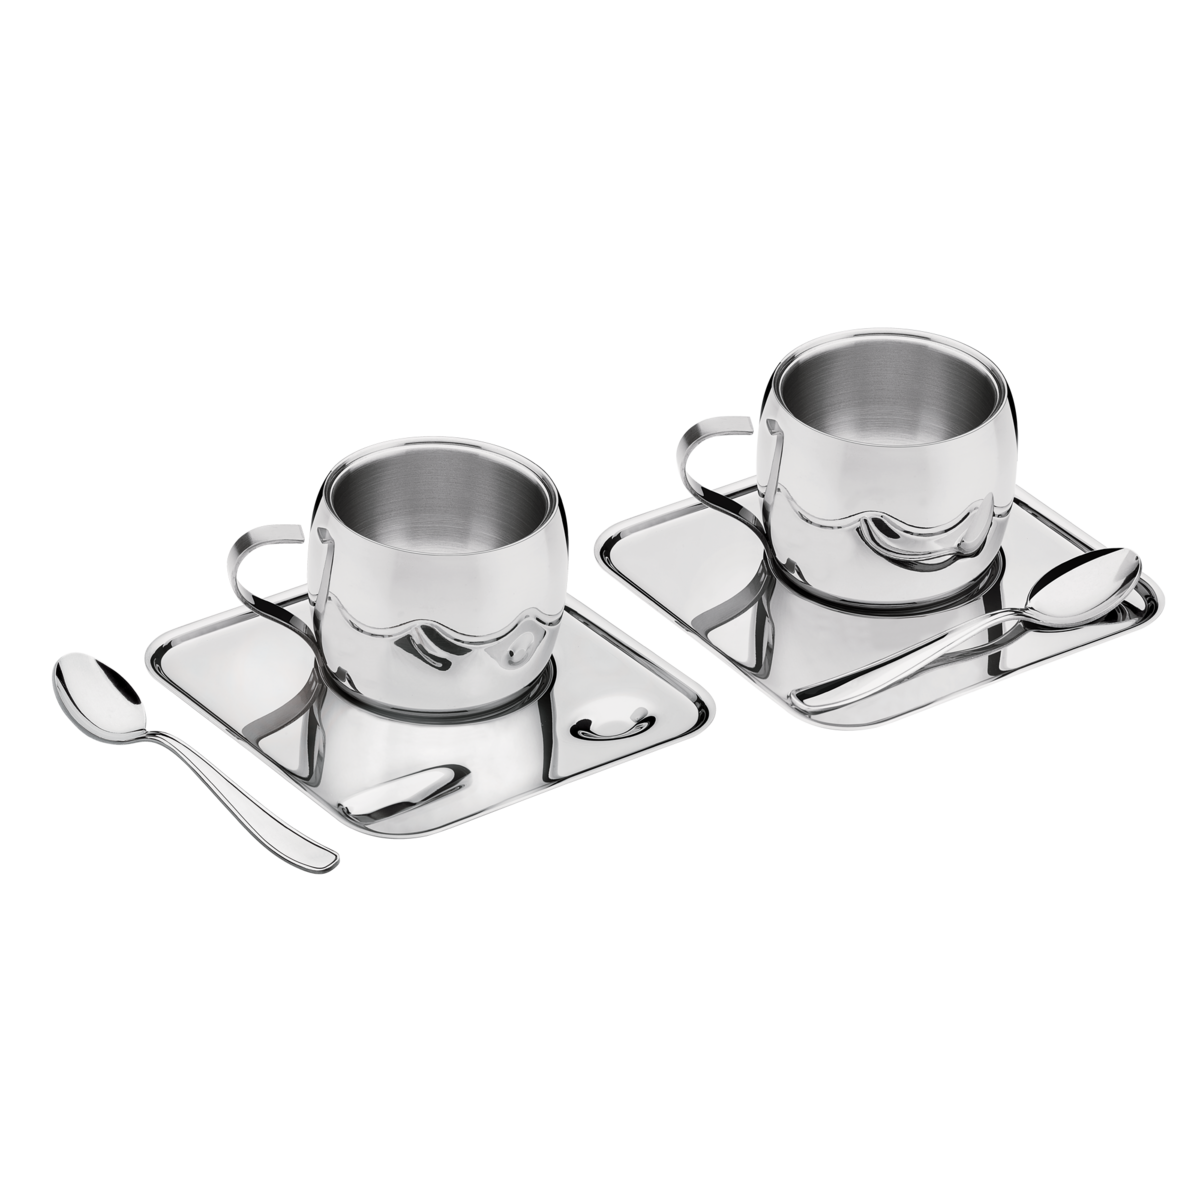 Stainless Steel Shiny Finish With 0.08L Capacity 6 x Tramontina Coffee Cups 